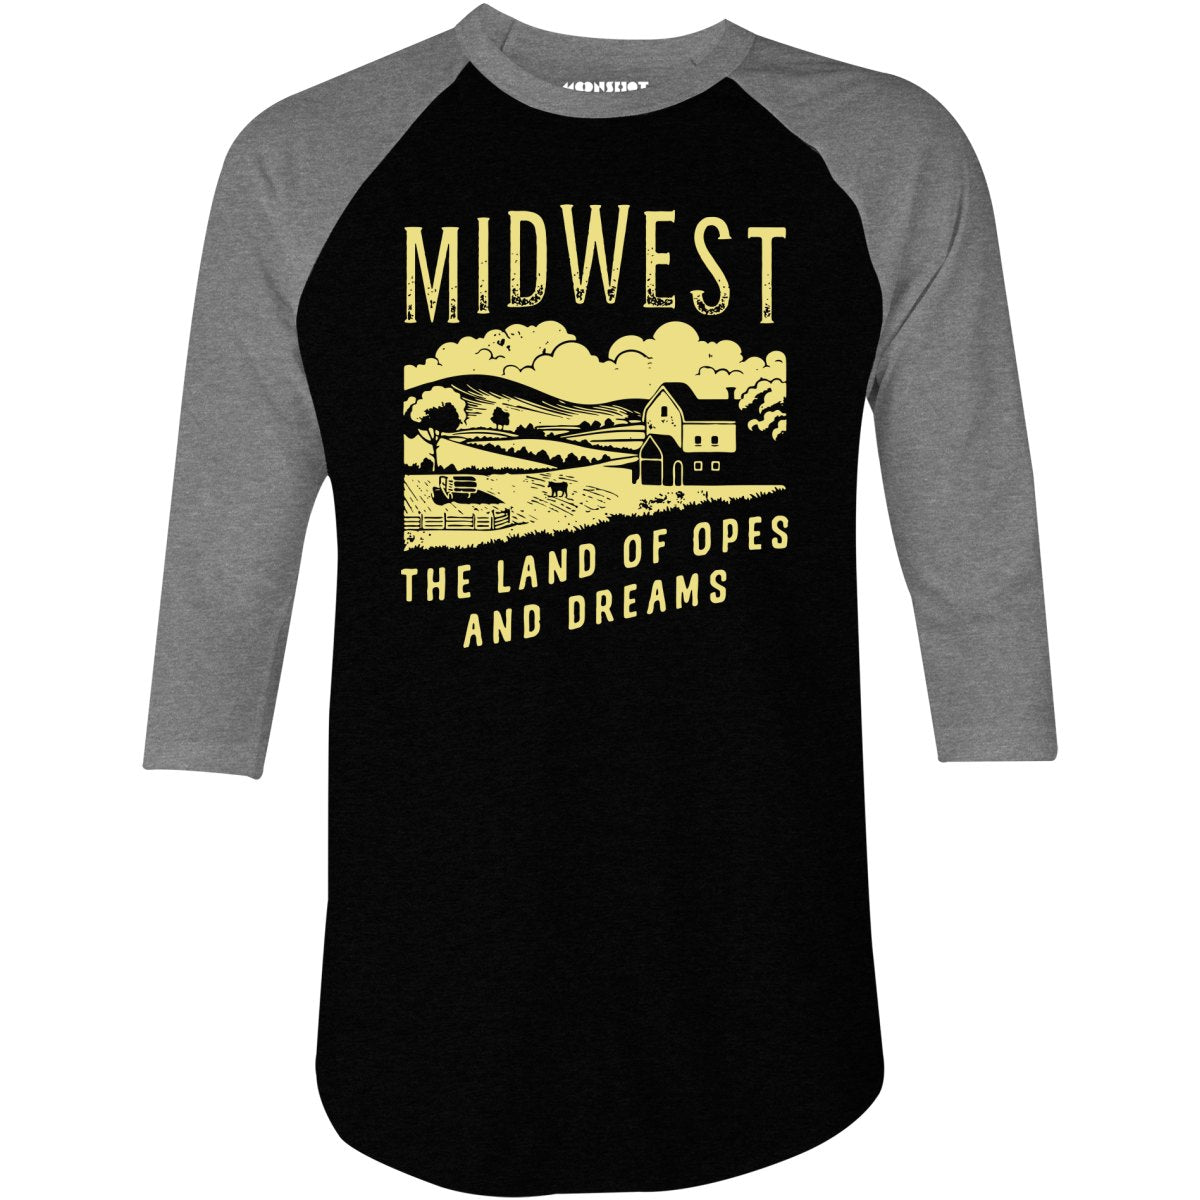 Midwest The Land of Opes and Dreams - 3/4 Sleeve Raglan T-Shirt